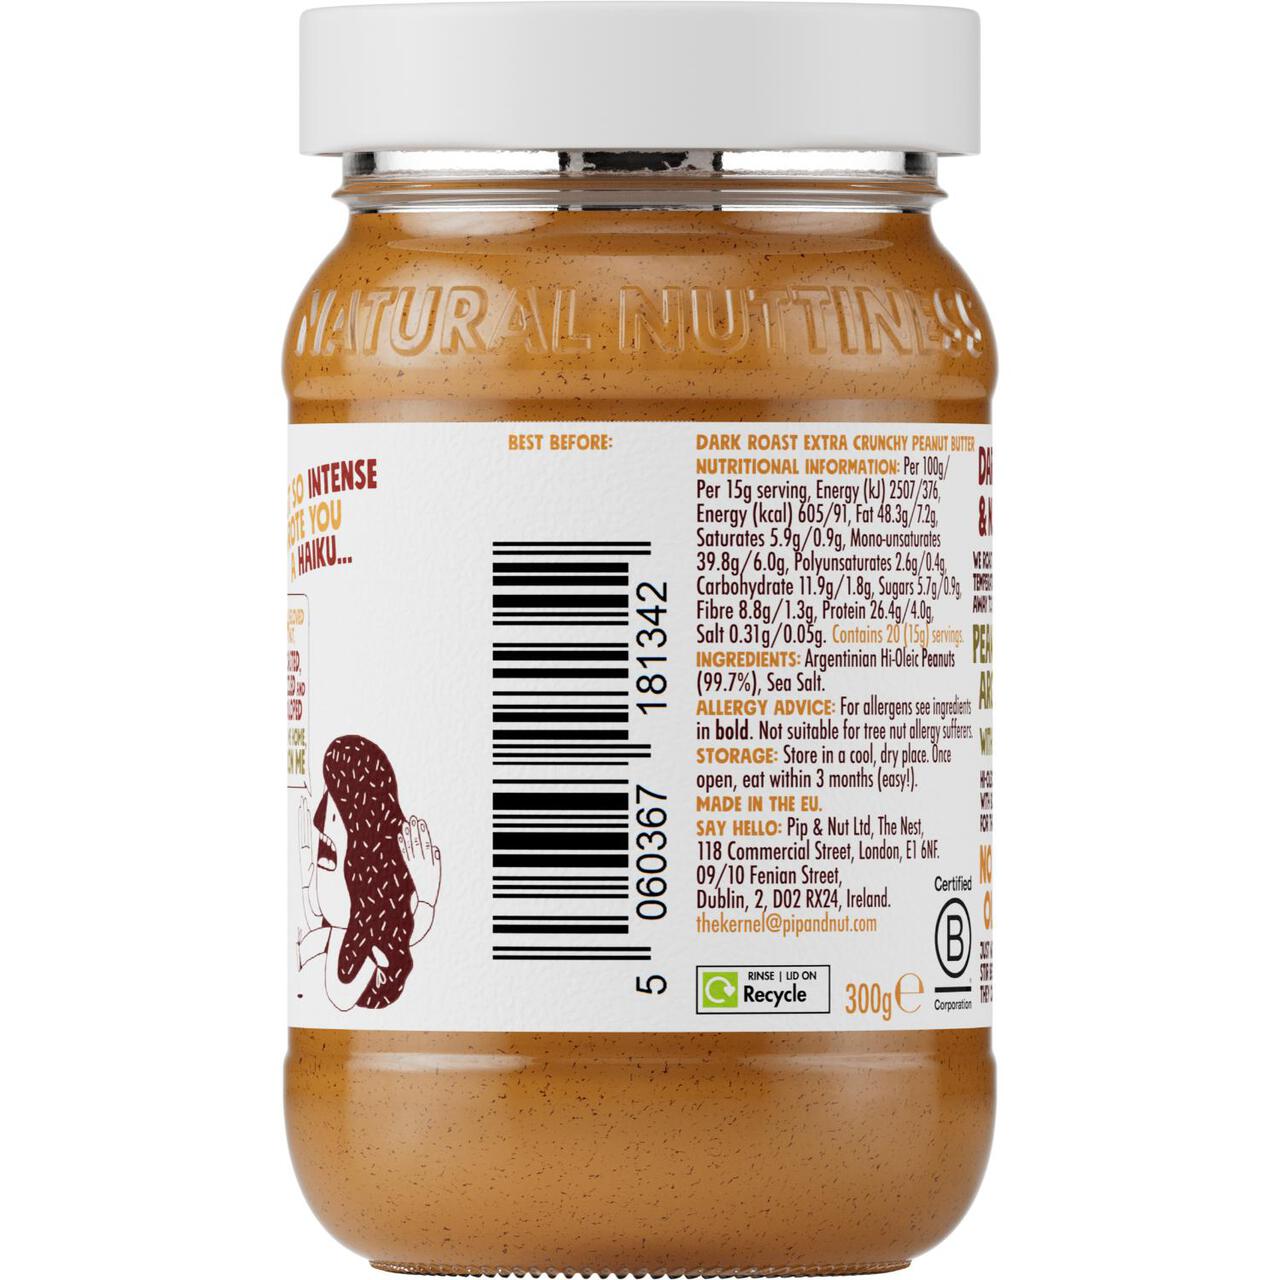 Pip & Nut Ultimate Smooth Peanut Butter 300g